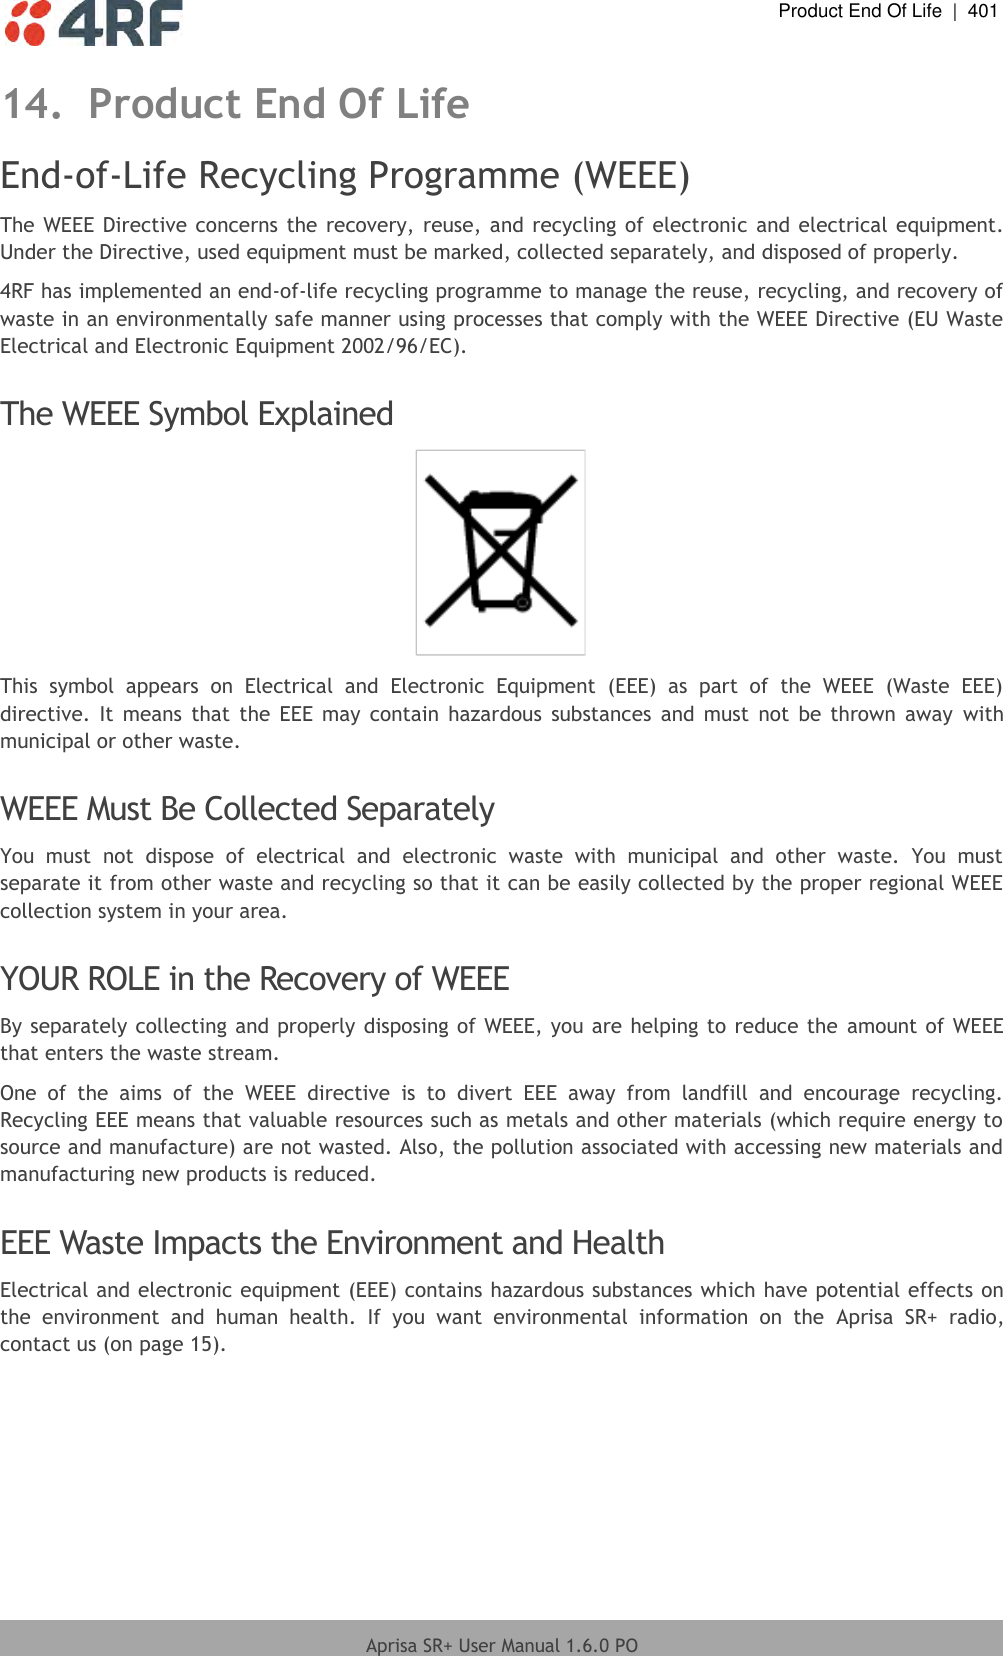  Product End Of Life  |  401  Aprisa SR+ User Manual 1.6.0 PO  14. Product End Of Life End-of-Life Recycling Programme (WEEE) The WEEE Directive concerns the recovery, reuse, and  recycling of electronic  and electrical equipment. Under the Directive, used equipment must be marked, collected separately, and disposed of properly. 4RF has implemented an end-of-life recycling programme to manage the reuse, recycling, and recovery of waste in an environmentally safe manner using processes that comply with the WEEE Directive (EU Waste Electrical and Electronic Equipment 2002/96/EC).  The WEEE Symbol Explained  This  symbol  appears  on  Electrical  and  Electronic  Equipment  (EEE)  as  part  of  the  WEEE  (Waste  EEE) directive.  It  means  that  the  EEE  may  contain  hazardous  substances  and  must  not  be  thrown  away  with municipal or other waste.  WEEE Must Be Collected Separately You  must  not  dispose  of  electrical  and  electronic  waste  with  municipal  and  other  waste.  You  must separate it from other waste and recycling so that it can be easily collected by the proper regional WEEE collection system in your area.  YOUR ROLE in the Recovery of WEEE By separately collecting and properly disposing of WEEE, you are helping to reduce the amount of WEEE that enters the waste stream. One  of  the  aims  of  the  WEEE  directive  is  to  divert  EEE  away  from  landfill  and  encourage  recycling. Recycling EEE means that valuable resources such as metals and other materials (which require energy to source and manufacture) are not wasted. Also, the pollution associated with accessing new materials and manufacturing new products is reduced.  EEE Waste Impacts the Environment and Health Electrical and electronic equipment (EEE) contains hazardous substances which have potential effects on the  environment  and  human  health.  If  you  want  environmental  information  on  the  Aprisa  SR+  radio, contact us (on page 15).      